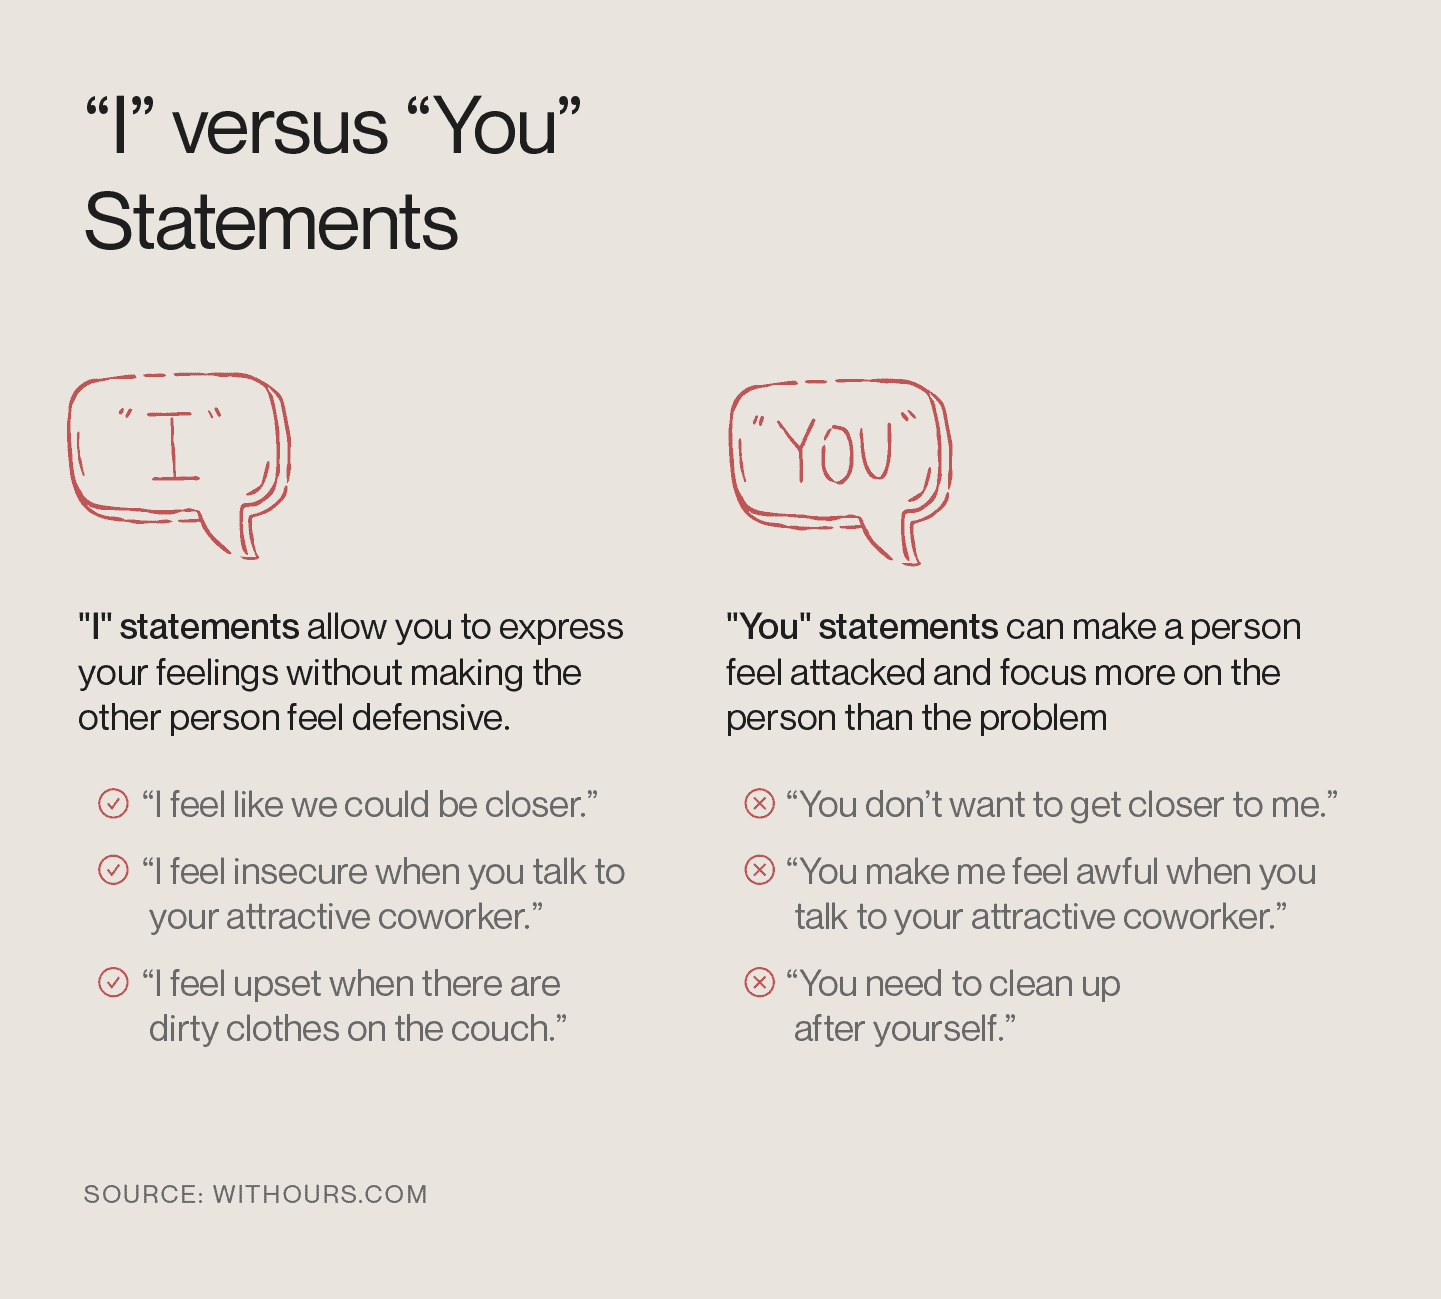 A communication exercises for couples chart comparing “I” vs “You” statements